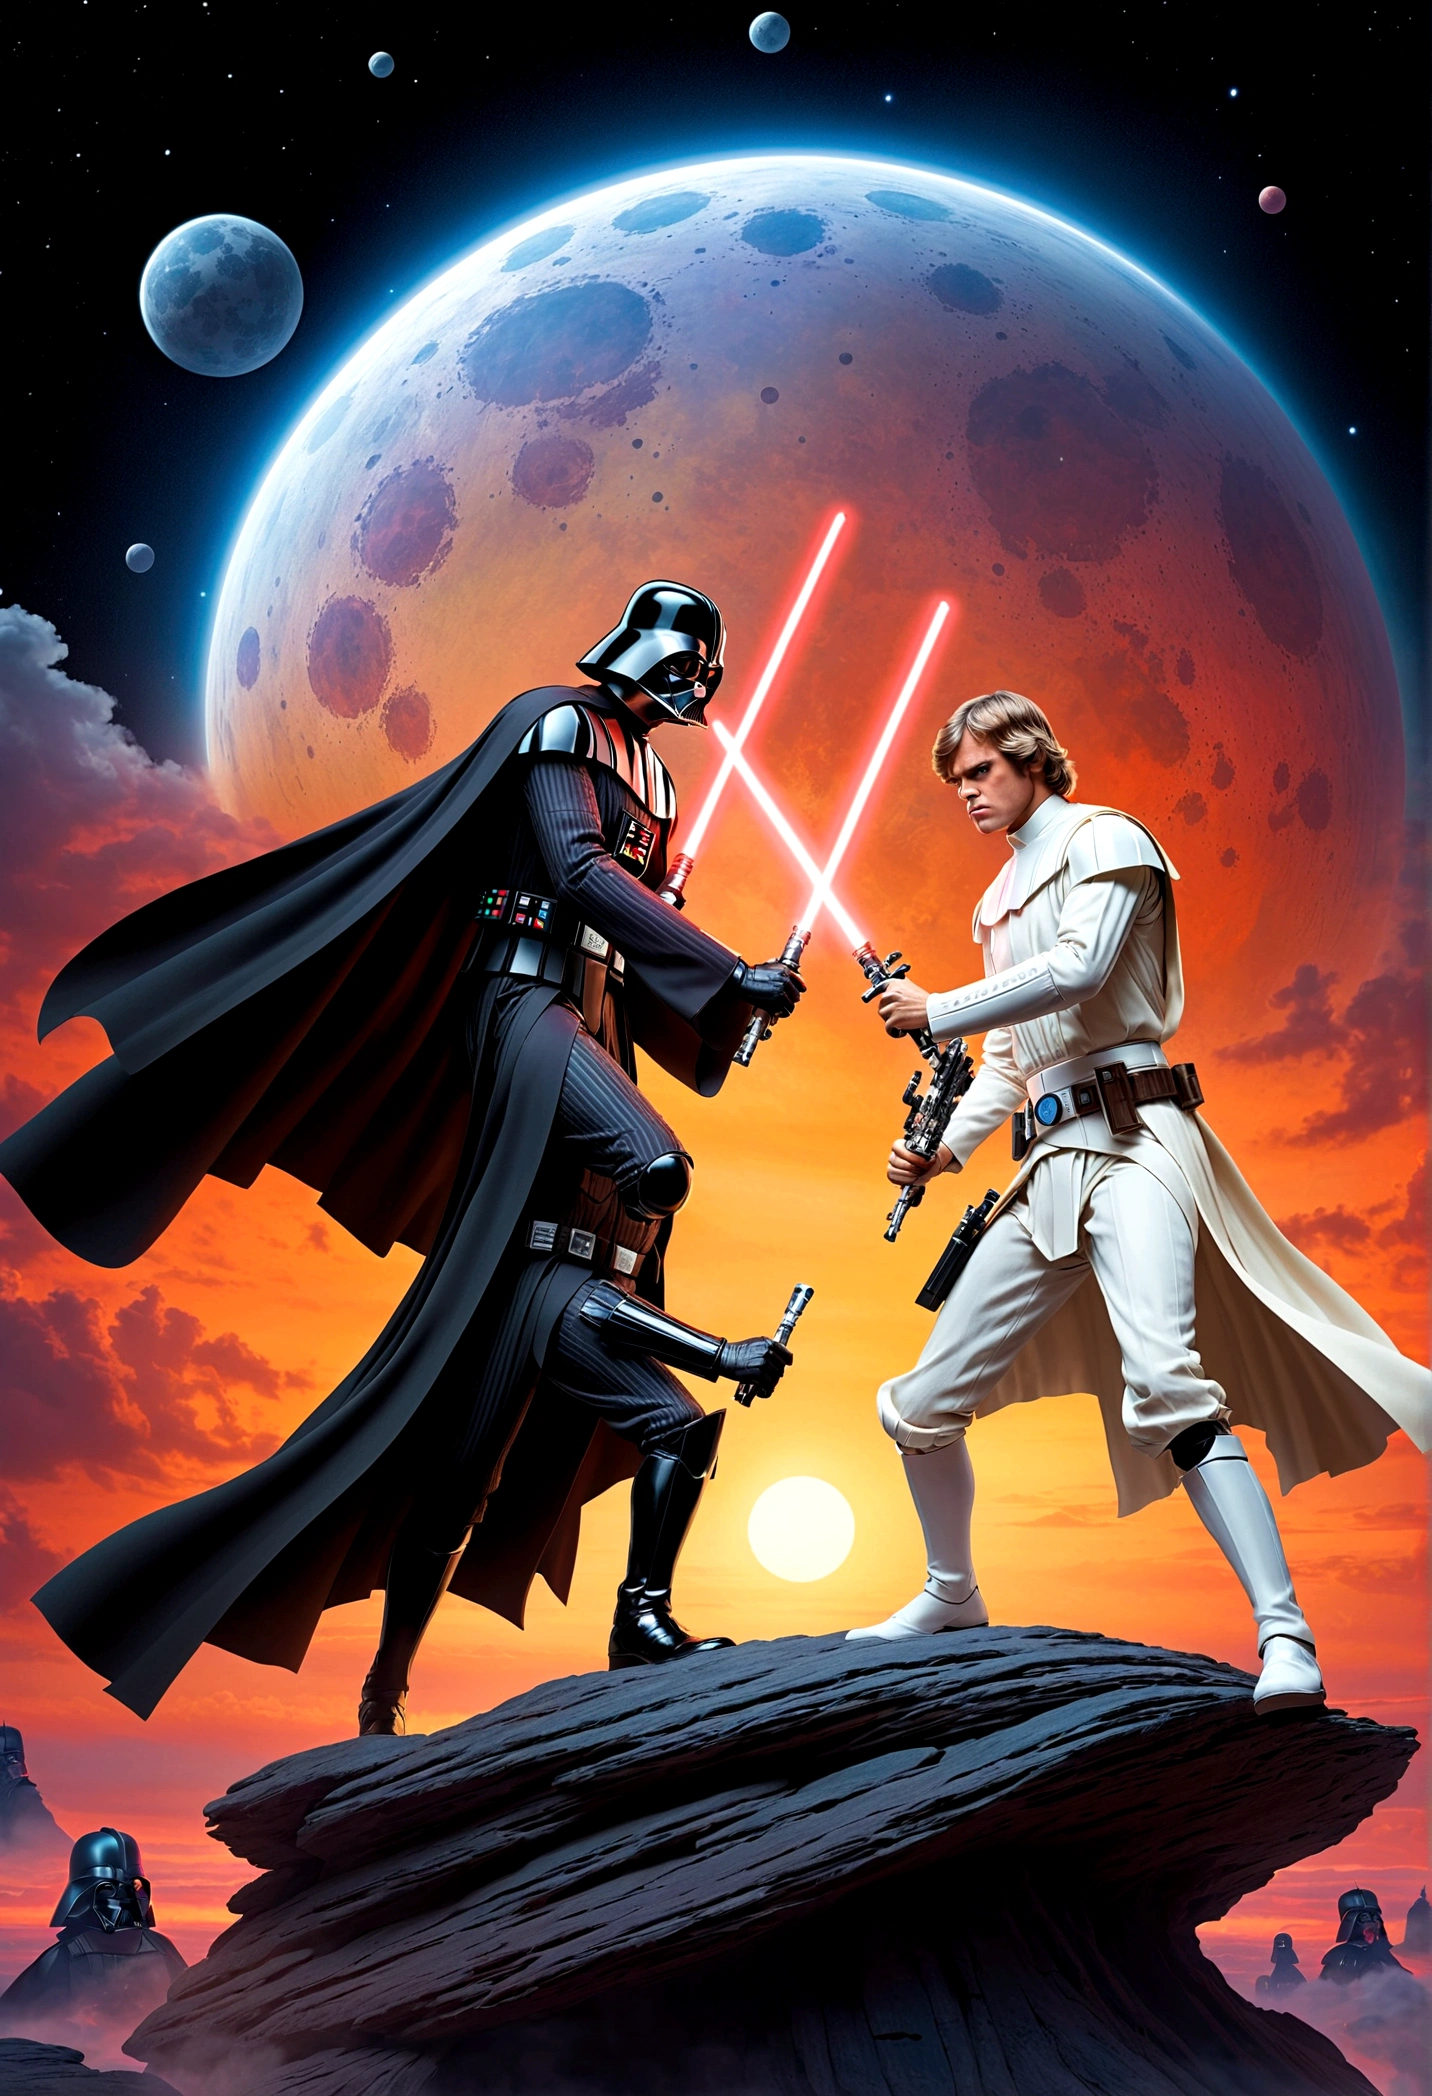 Star Wars rock opera, Luke Skywalker and  Darth Vader are dueling using guitars. emotional, powerful, dramatic, dueling power ballads, Bespin Cloud City